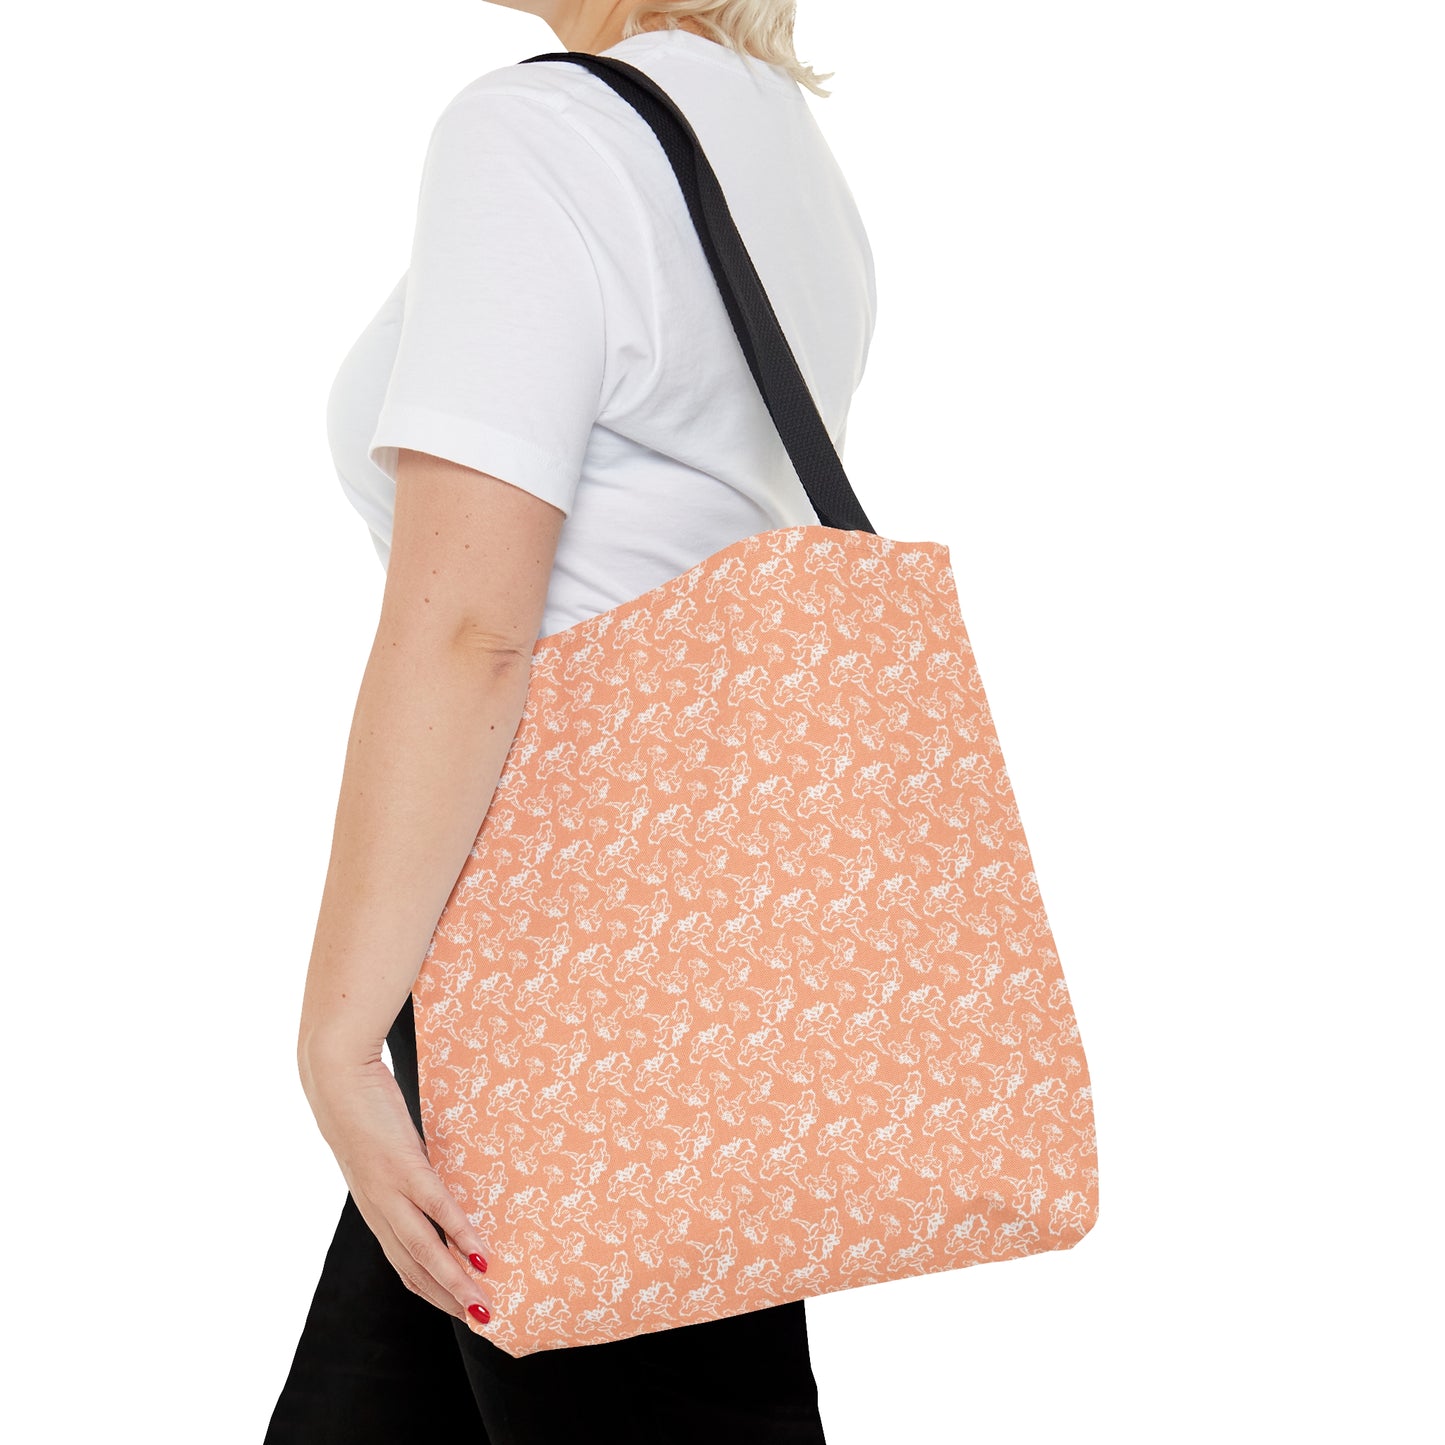 Light Peach with White Flowers Tote Bag